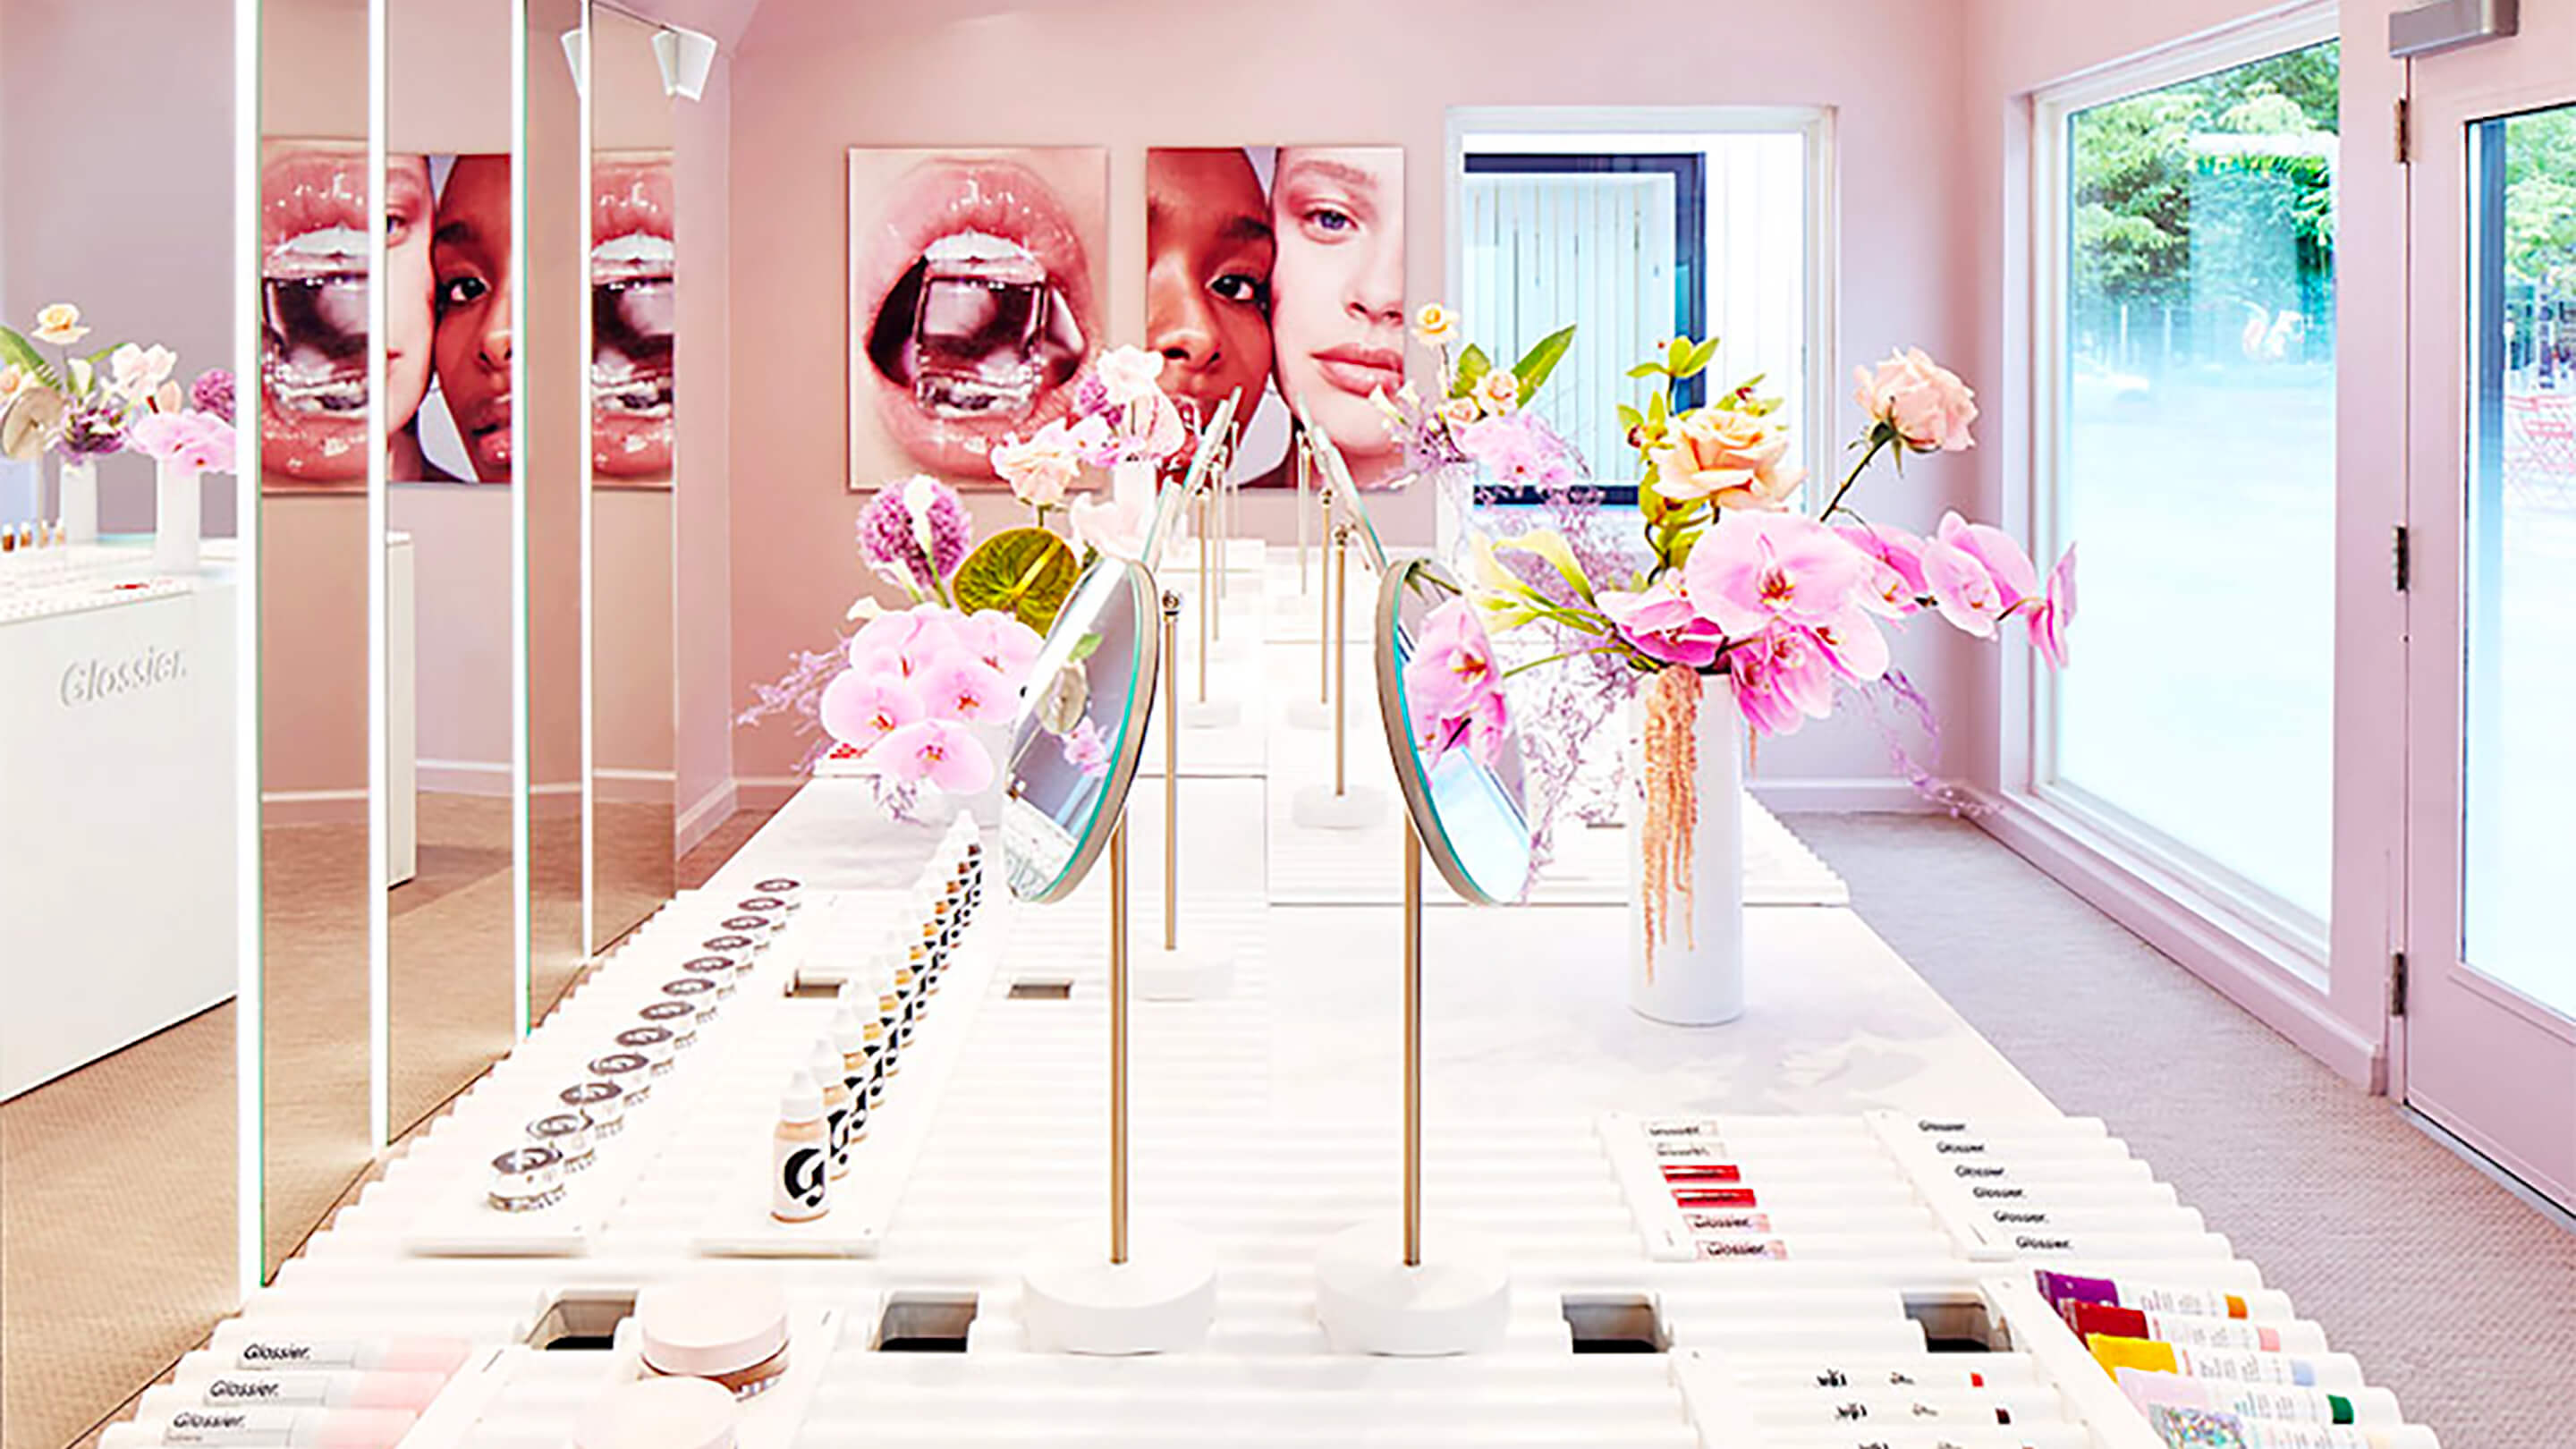 Inside a glossier store with an assortment of flowers, mirrors and makeup placed on a white table